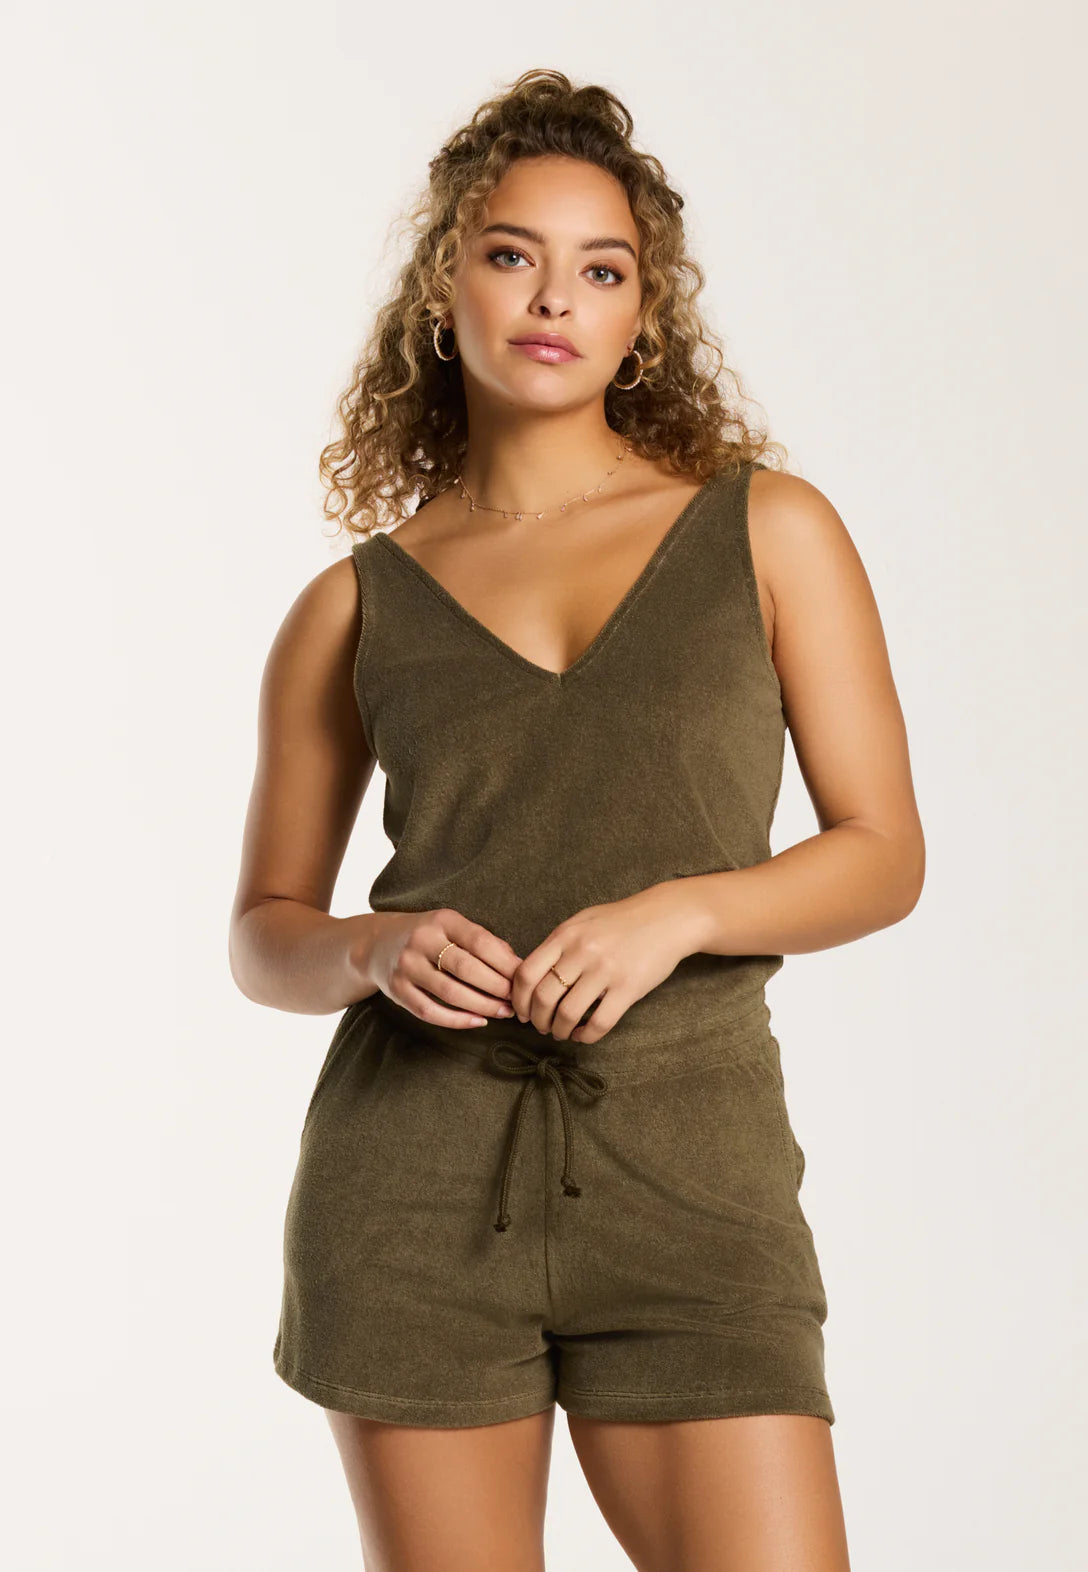 Fiji playsuit forest green - Shiwi